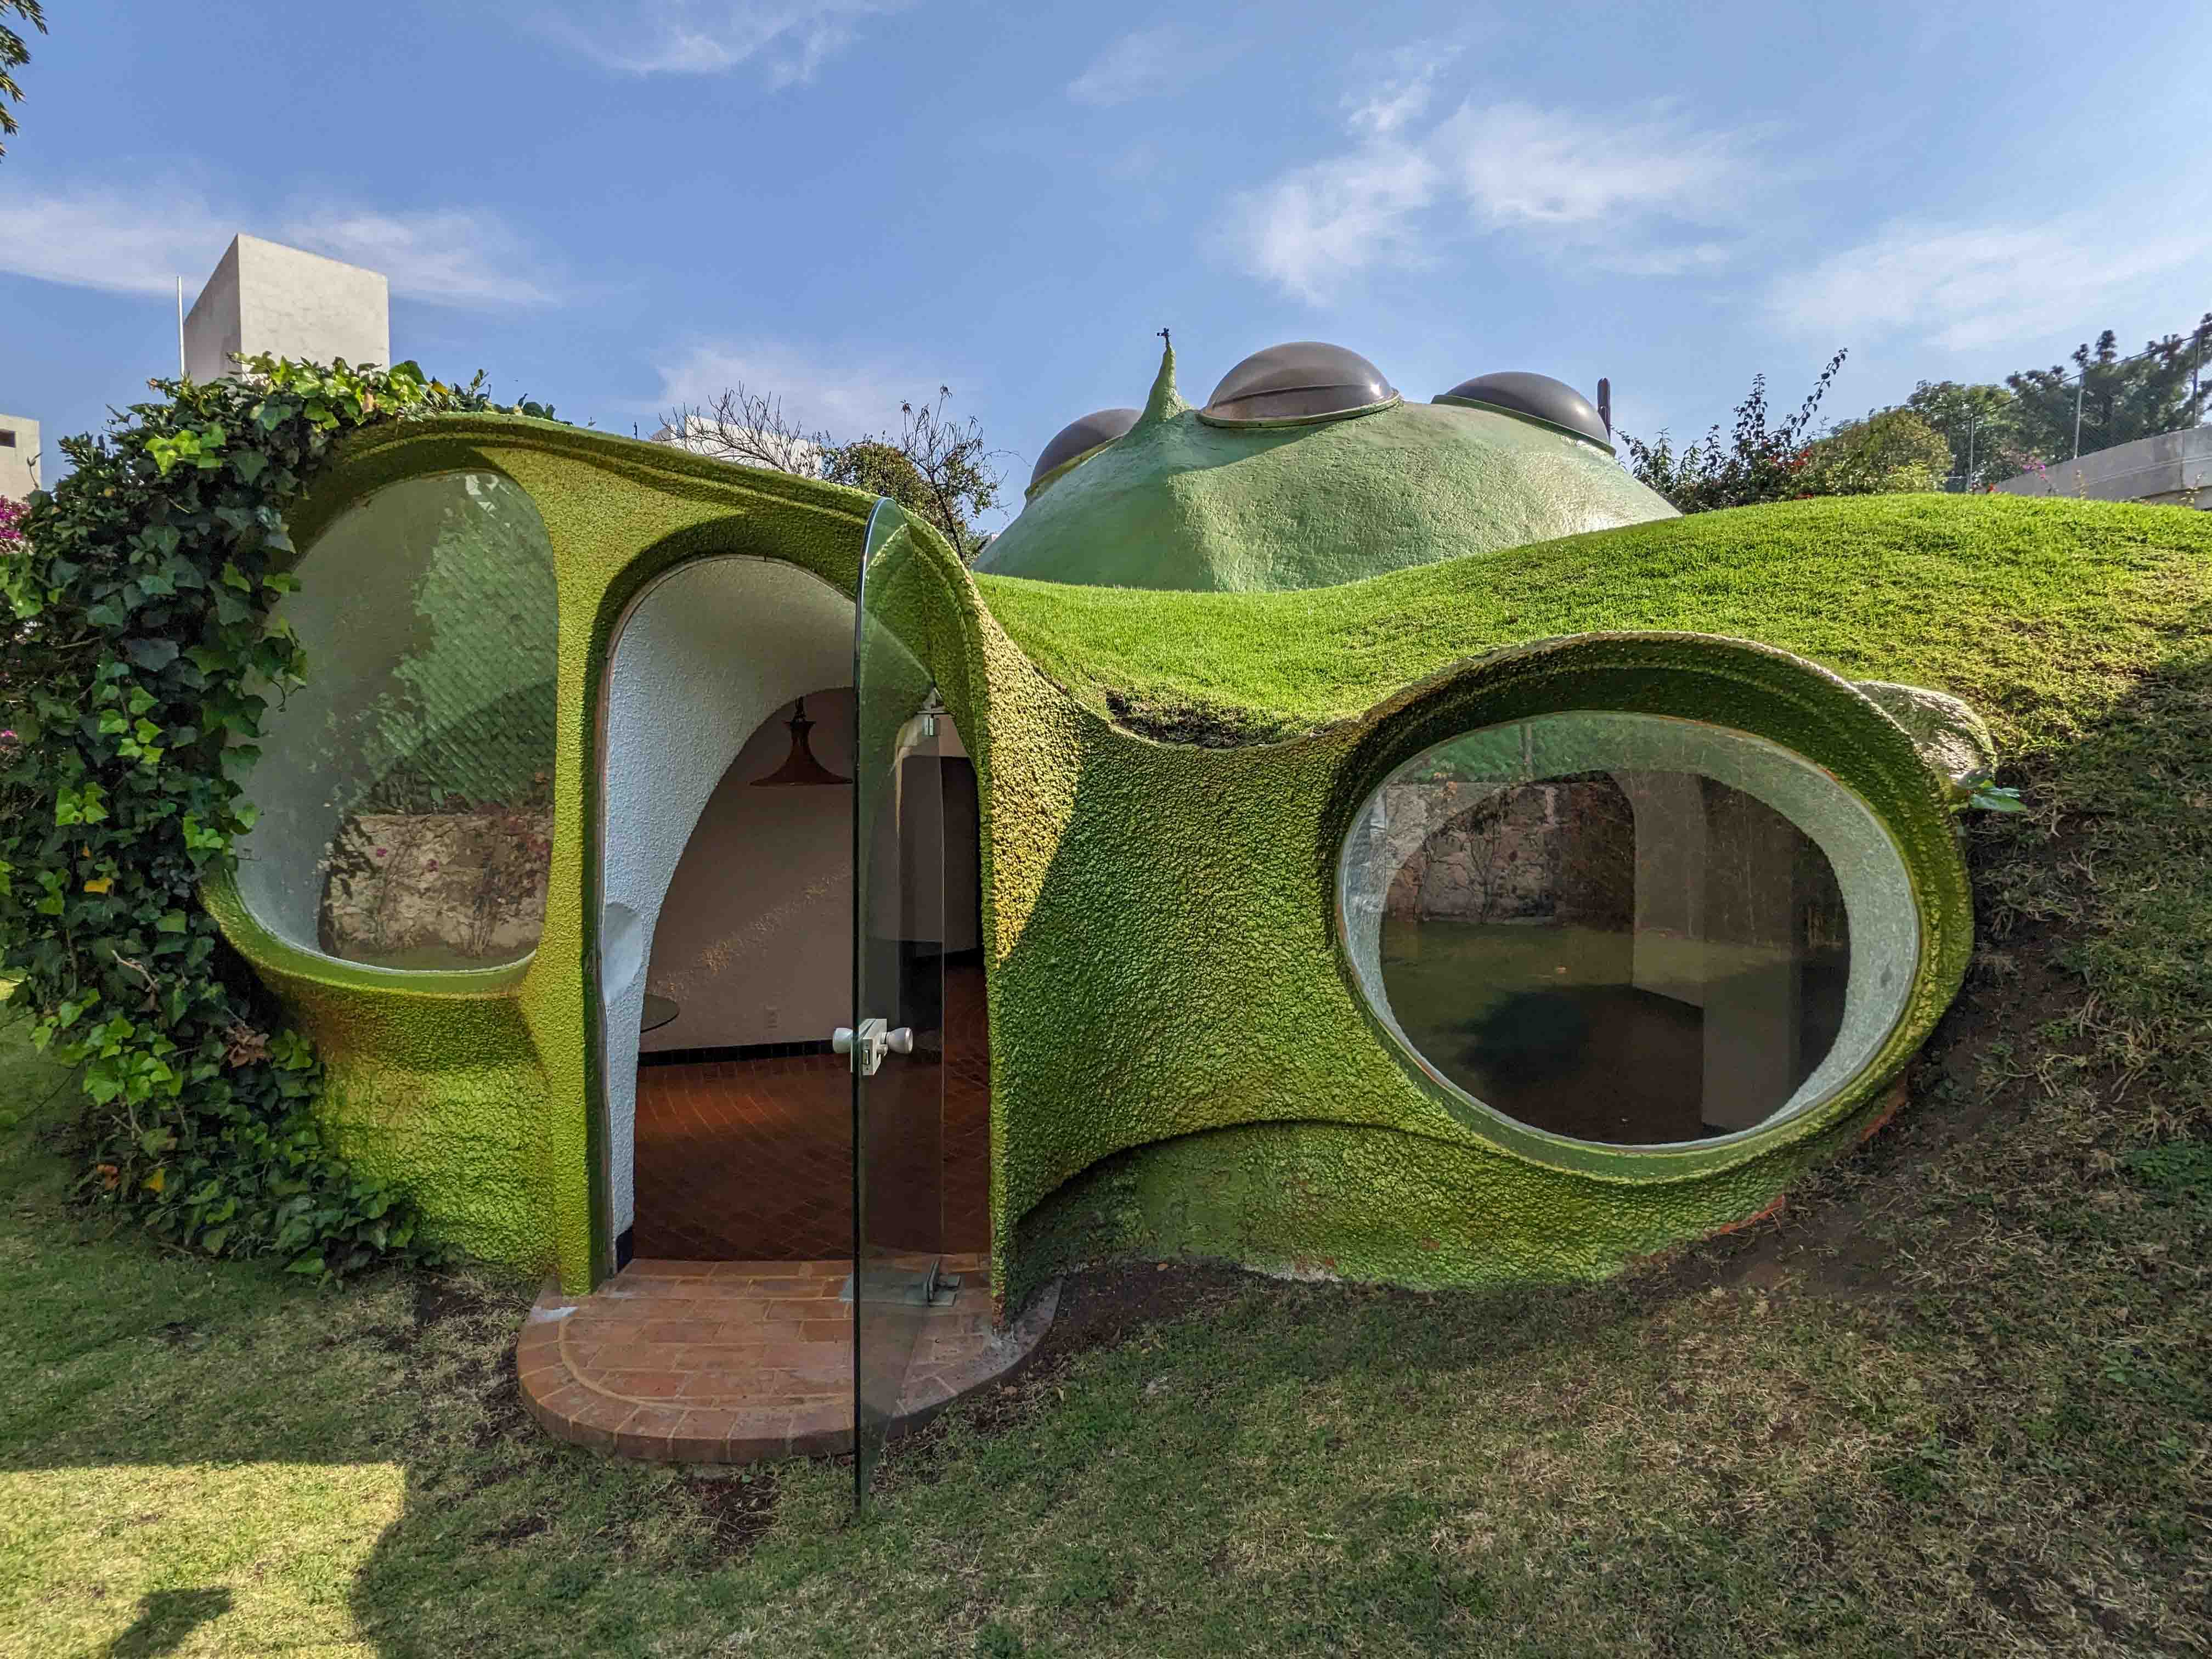 Exterior shot of a grass-covered residence in an organic architecture style